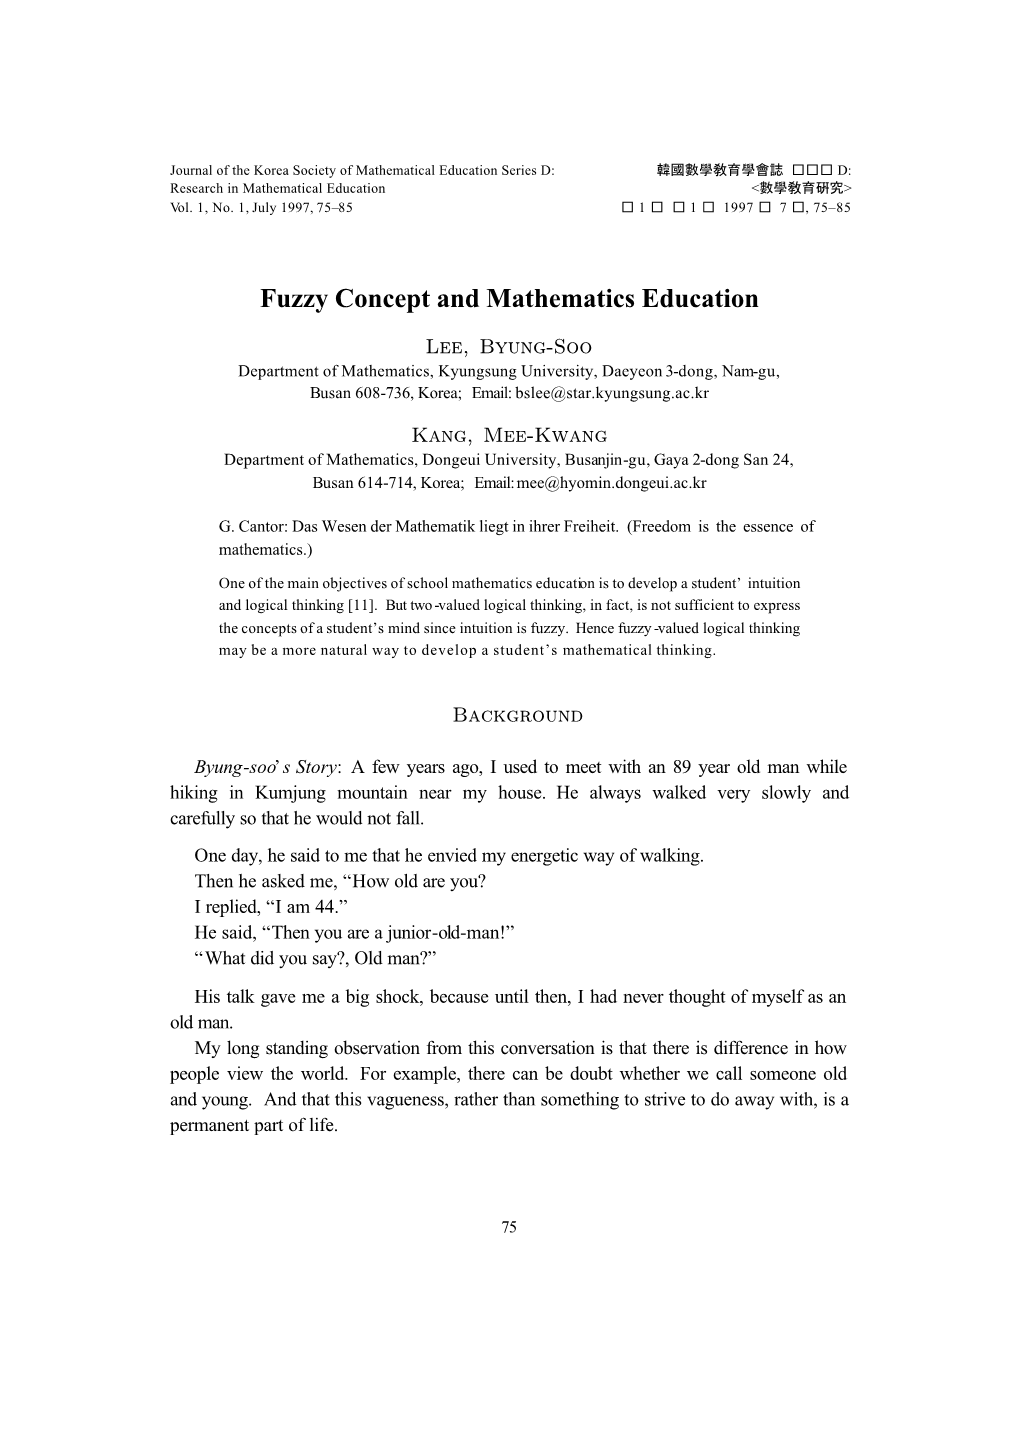 Fuzzy Concept and Mathematics Education